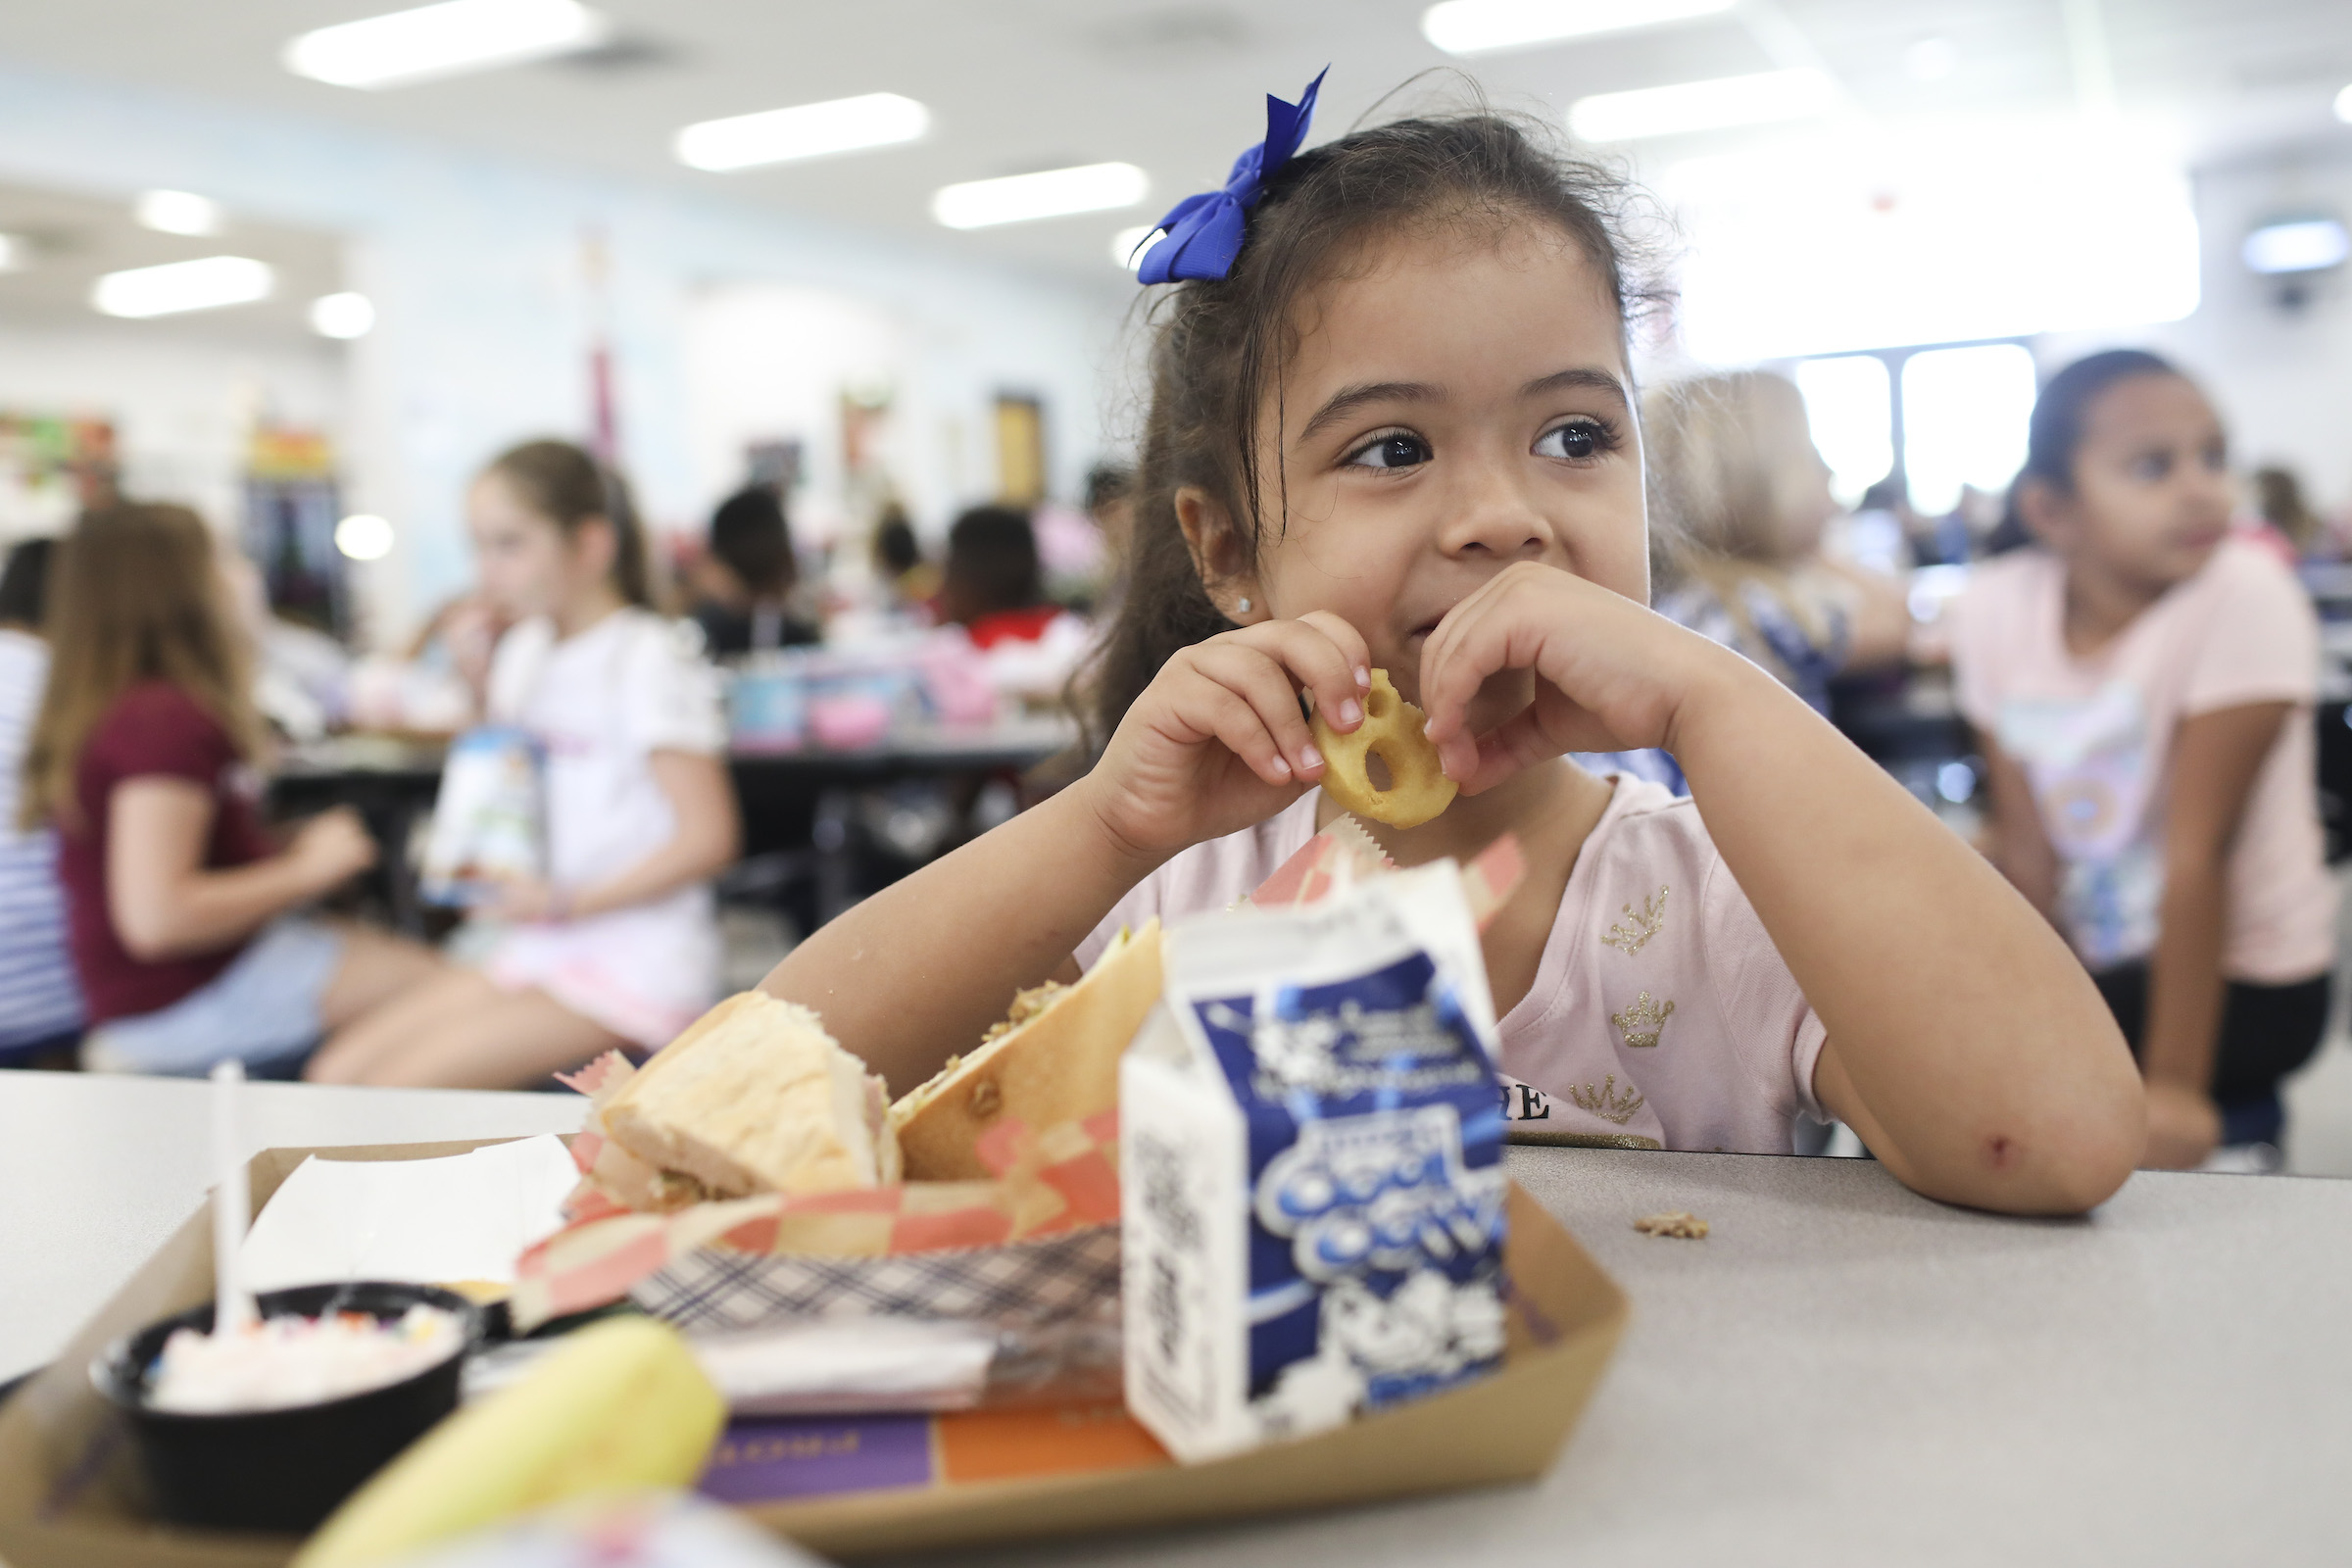 Valerie Yanez, 4 eats a smiley face fry during her lunch period in the cafeteria at Doby Elementary School in Apollo Beach, Florida on October 4, 2019.